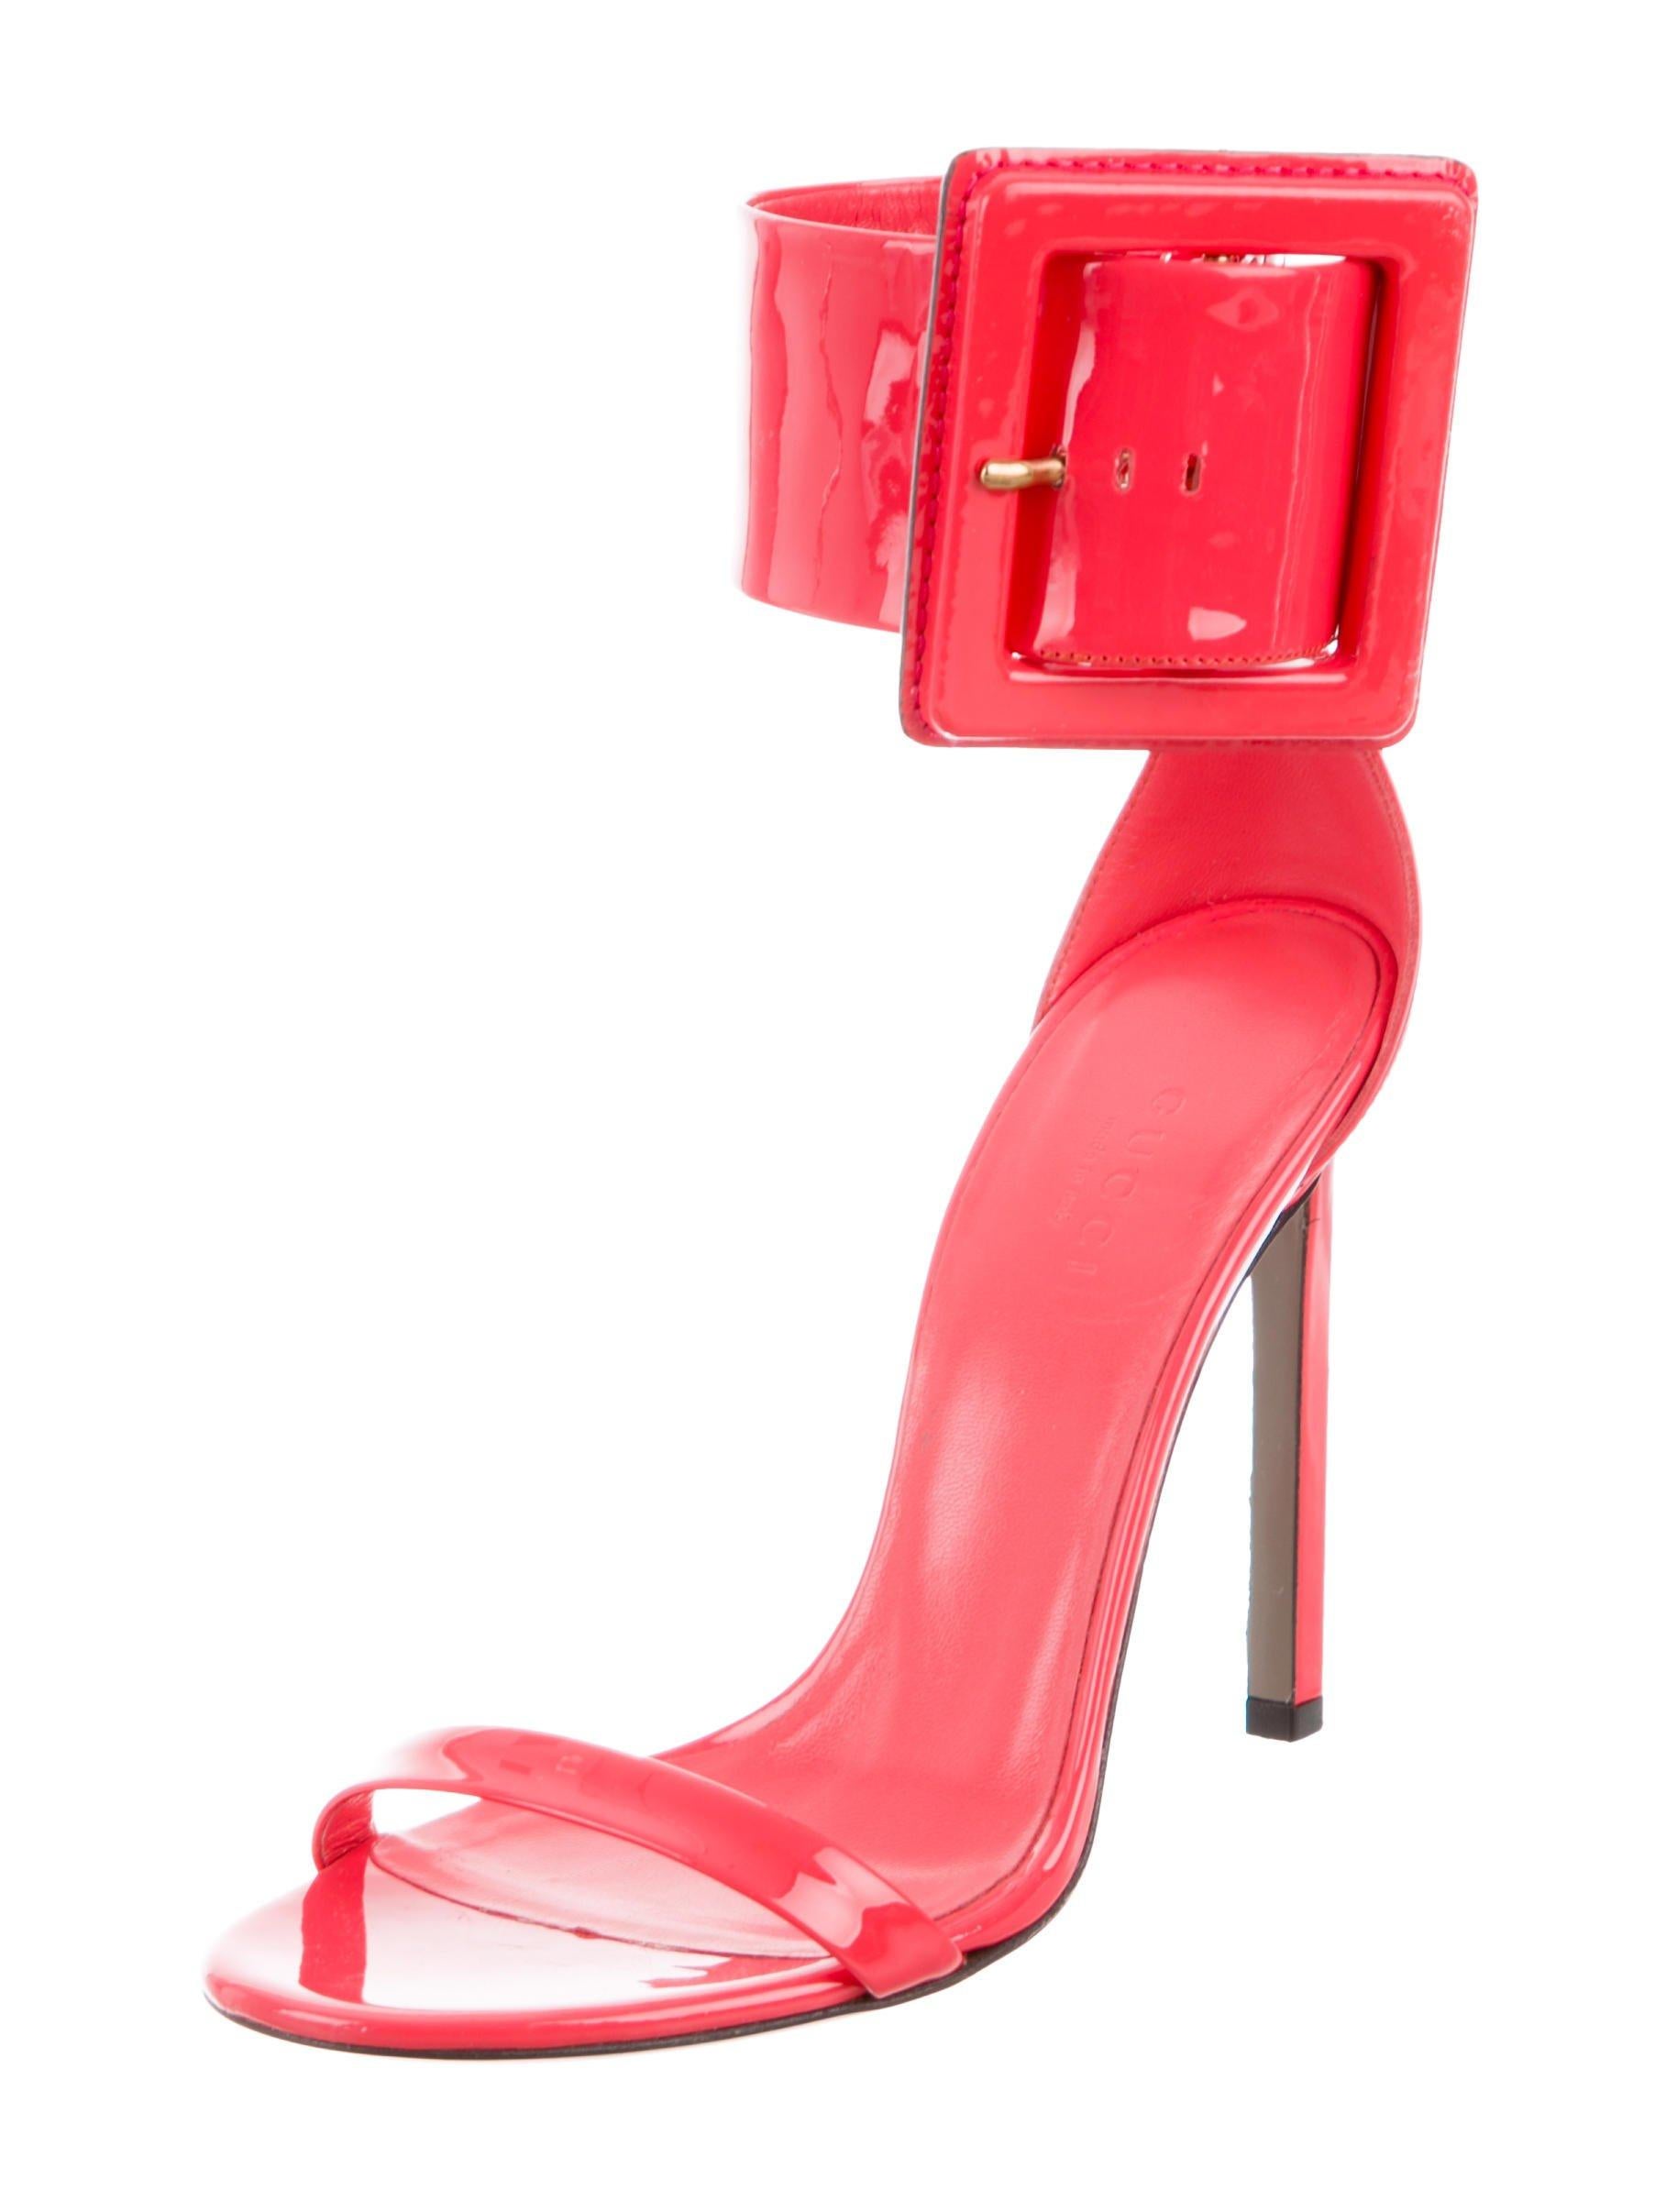 Red GUCCI NEW Patent Leather Ankle Buckle Evening Sandals Heels 